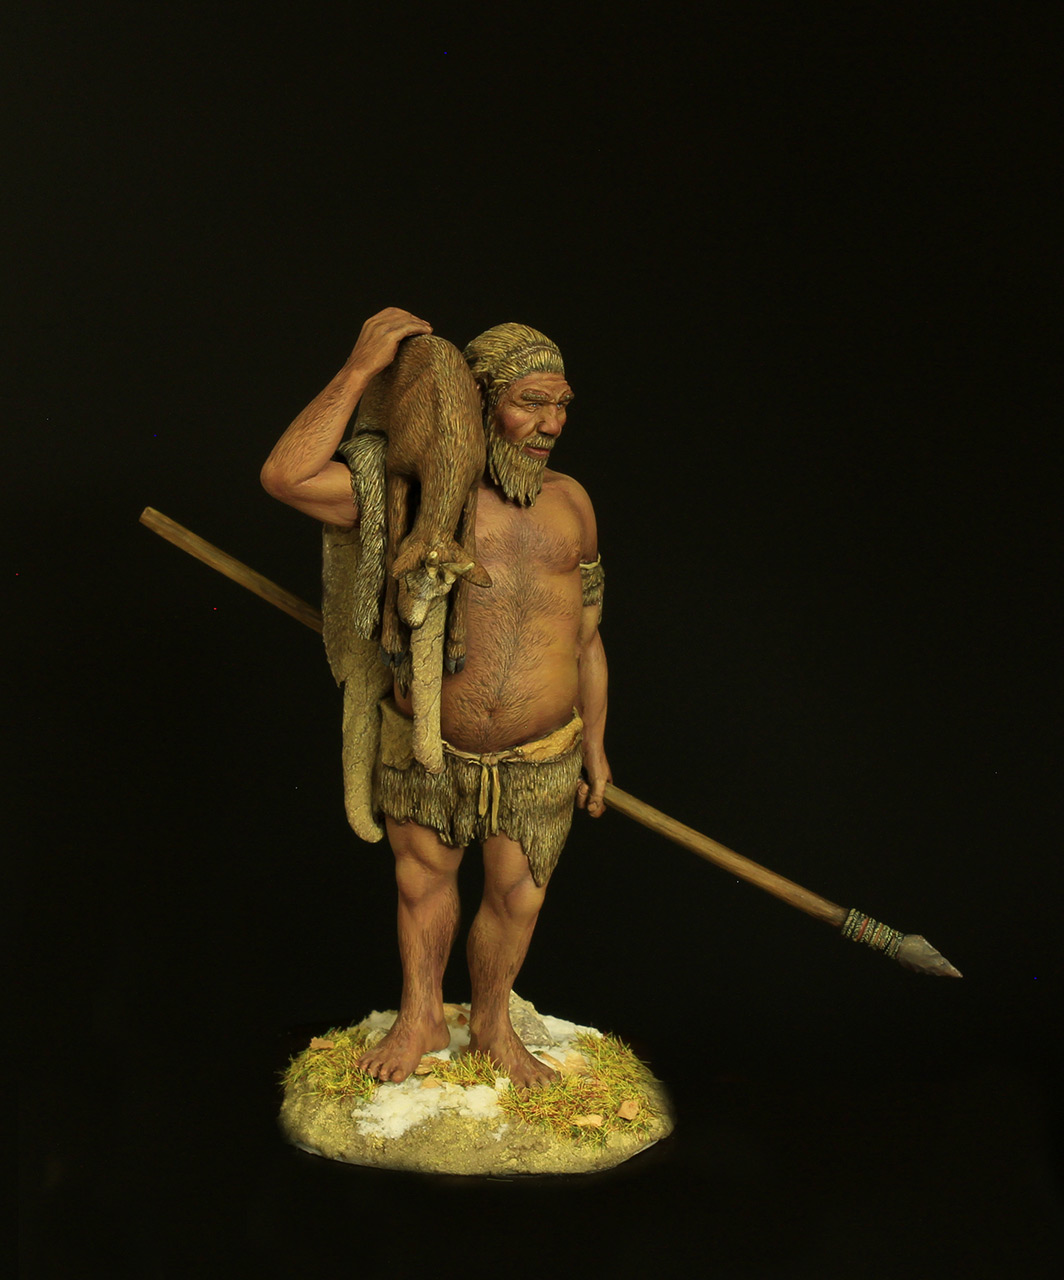 Figures: The Neanderthal, photo #2